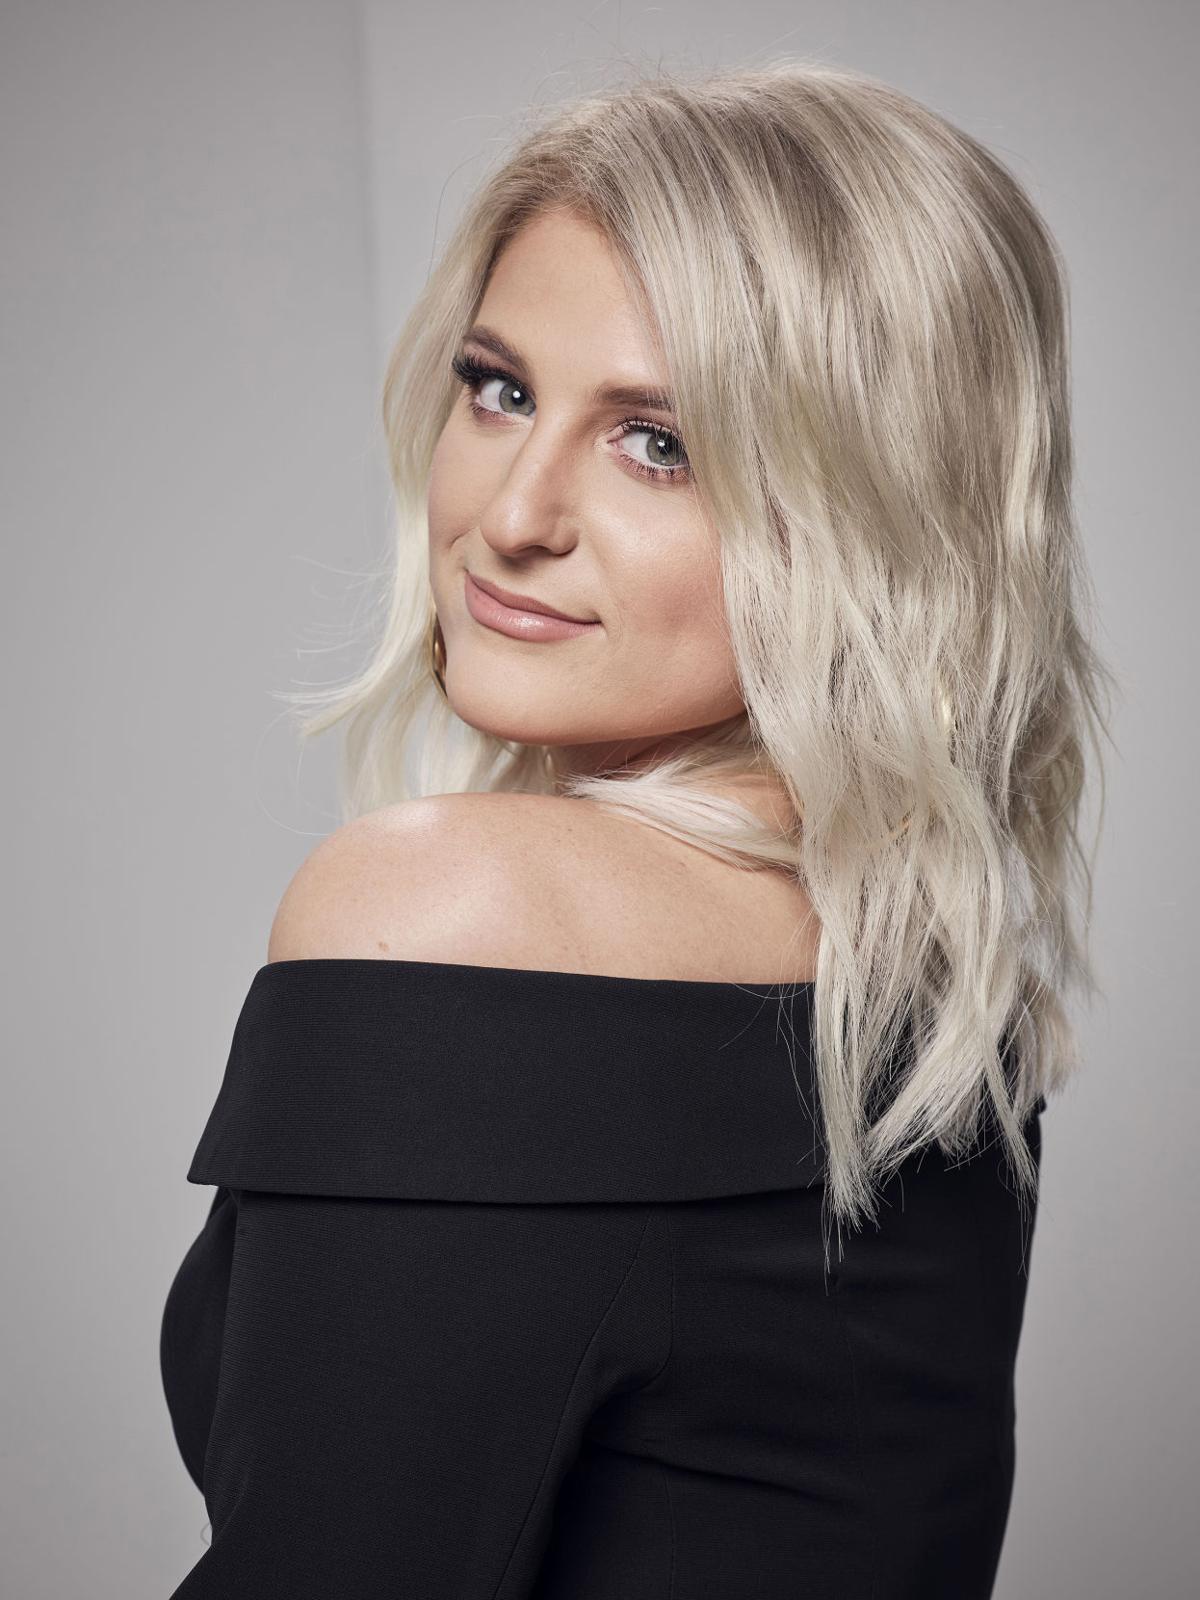 Meghan Trainor says it's all about the songs | Music | siouxcityjournal.com